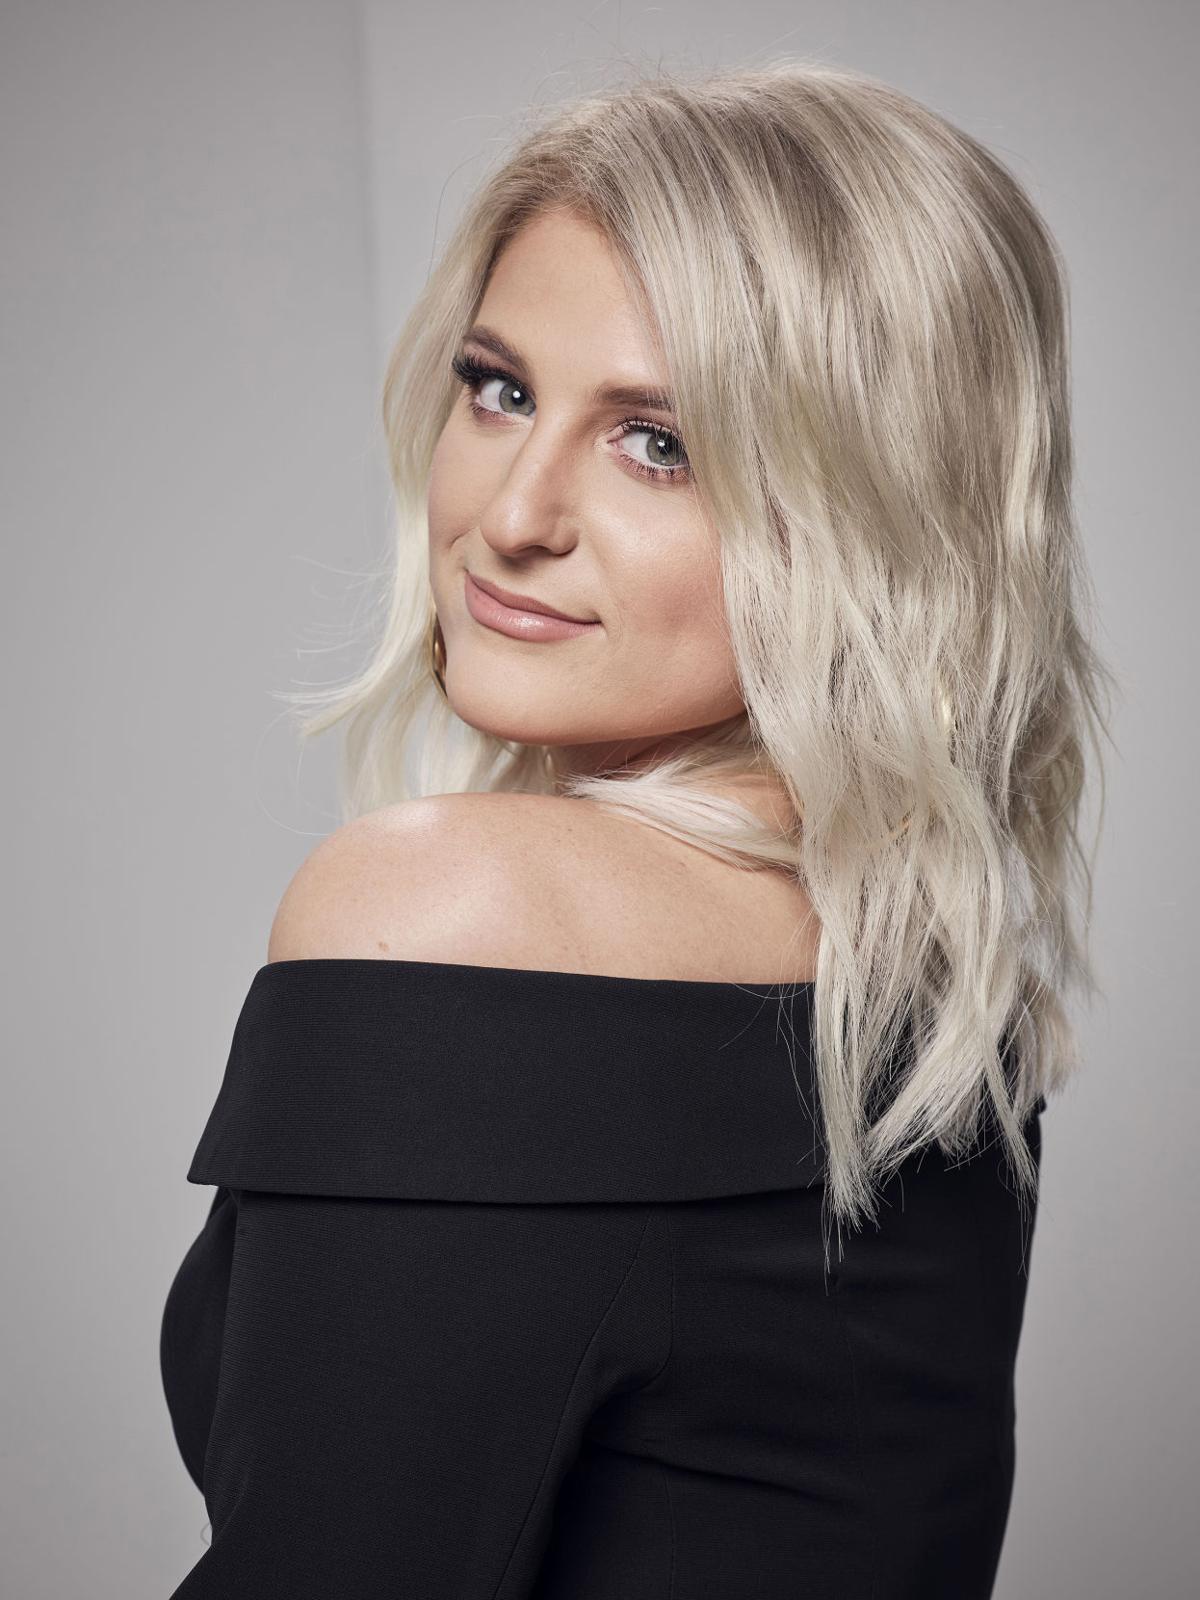 Meghan Trainor says it's all about the songs | Music | siouxcityjournal.com